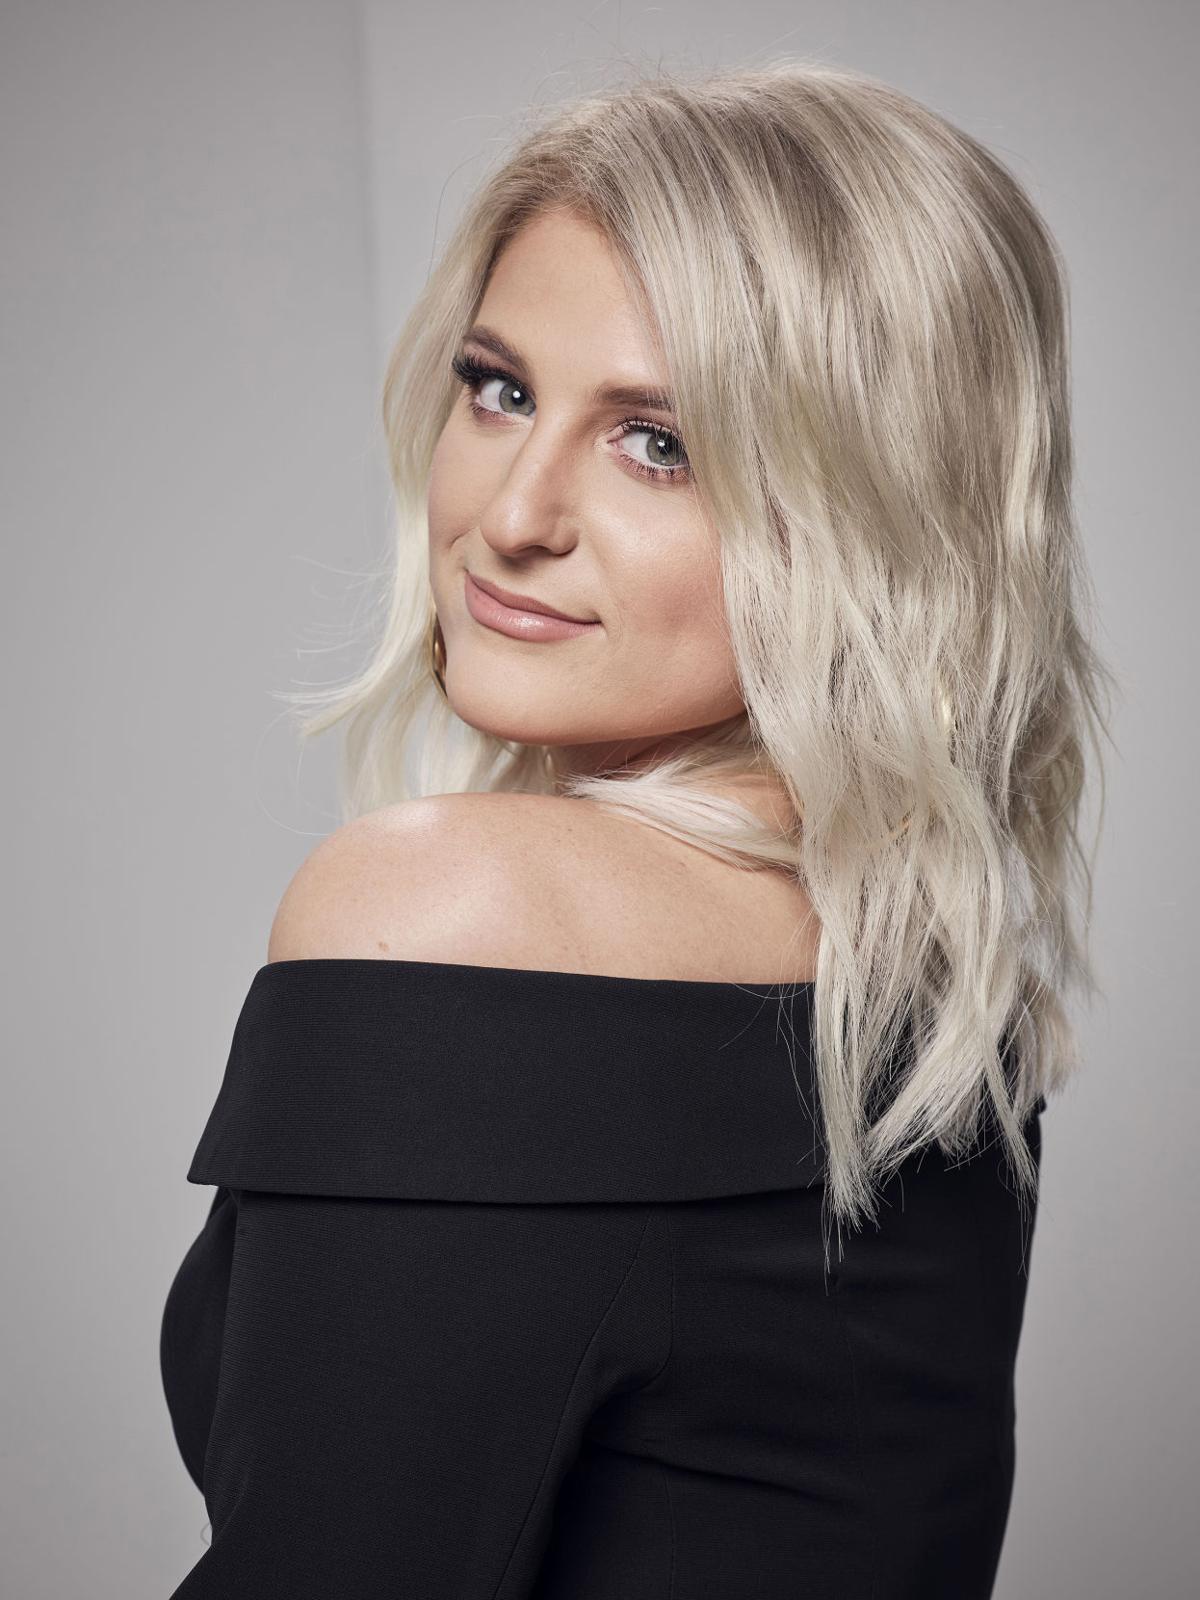 Meghan Trainor says it's all about the songs | Music | siouxcityjournal.com